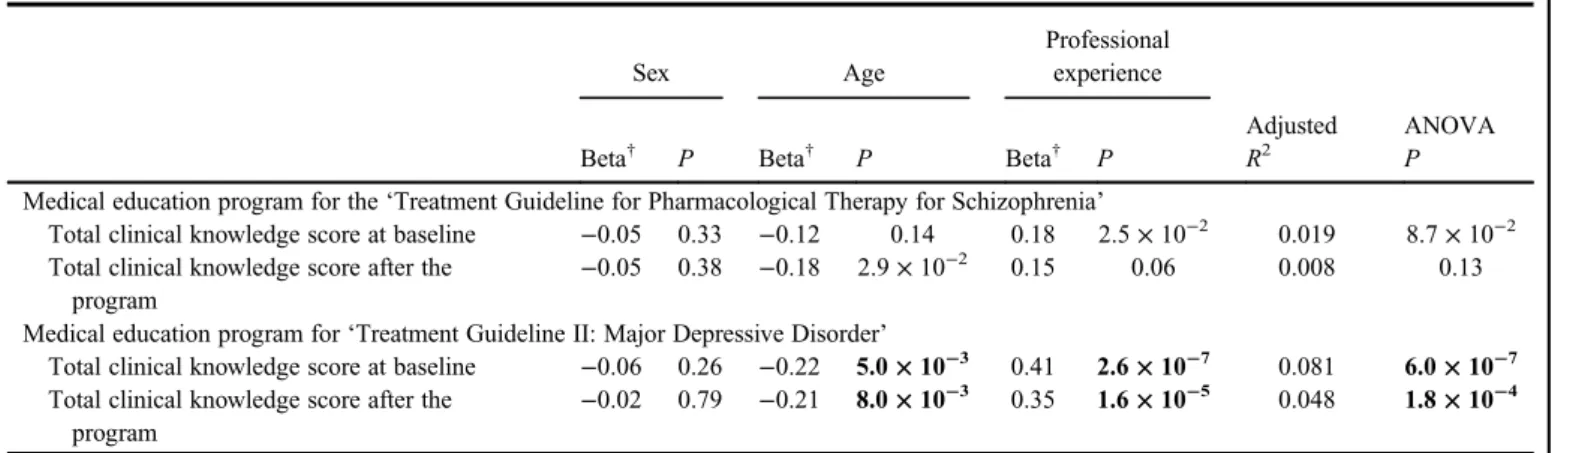 Table 4. Results of multiple regression analyses of the clinical knowledge scores